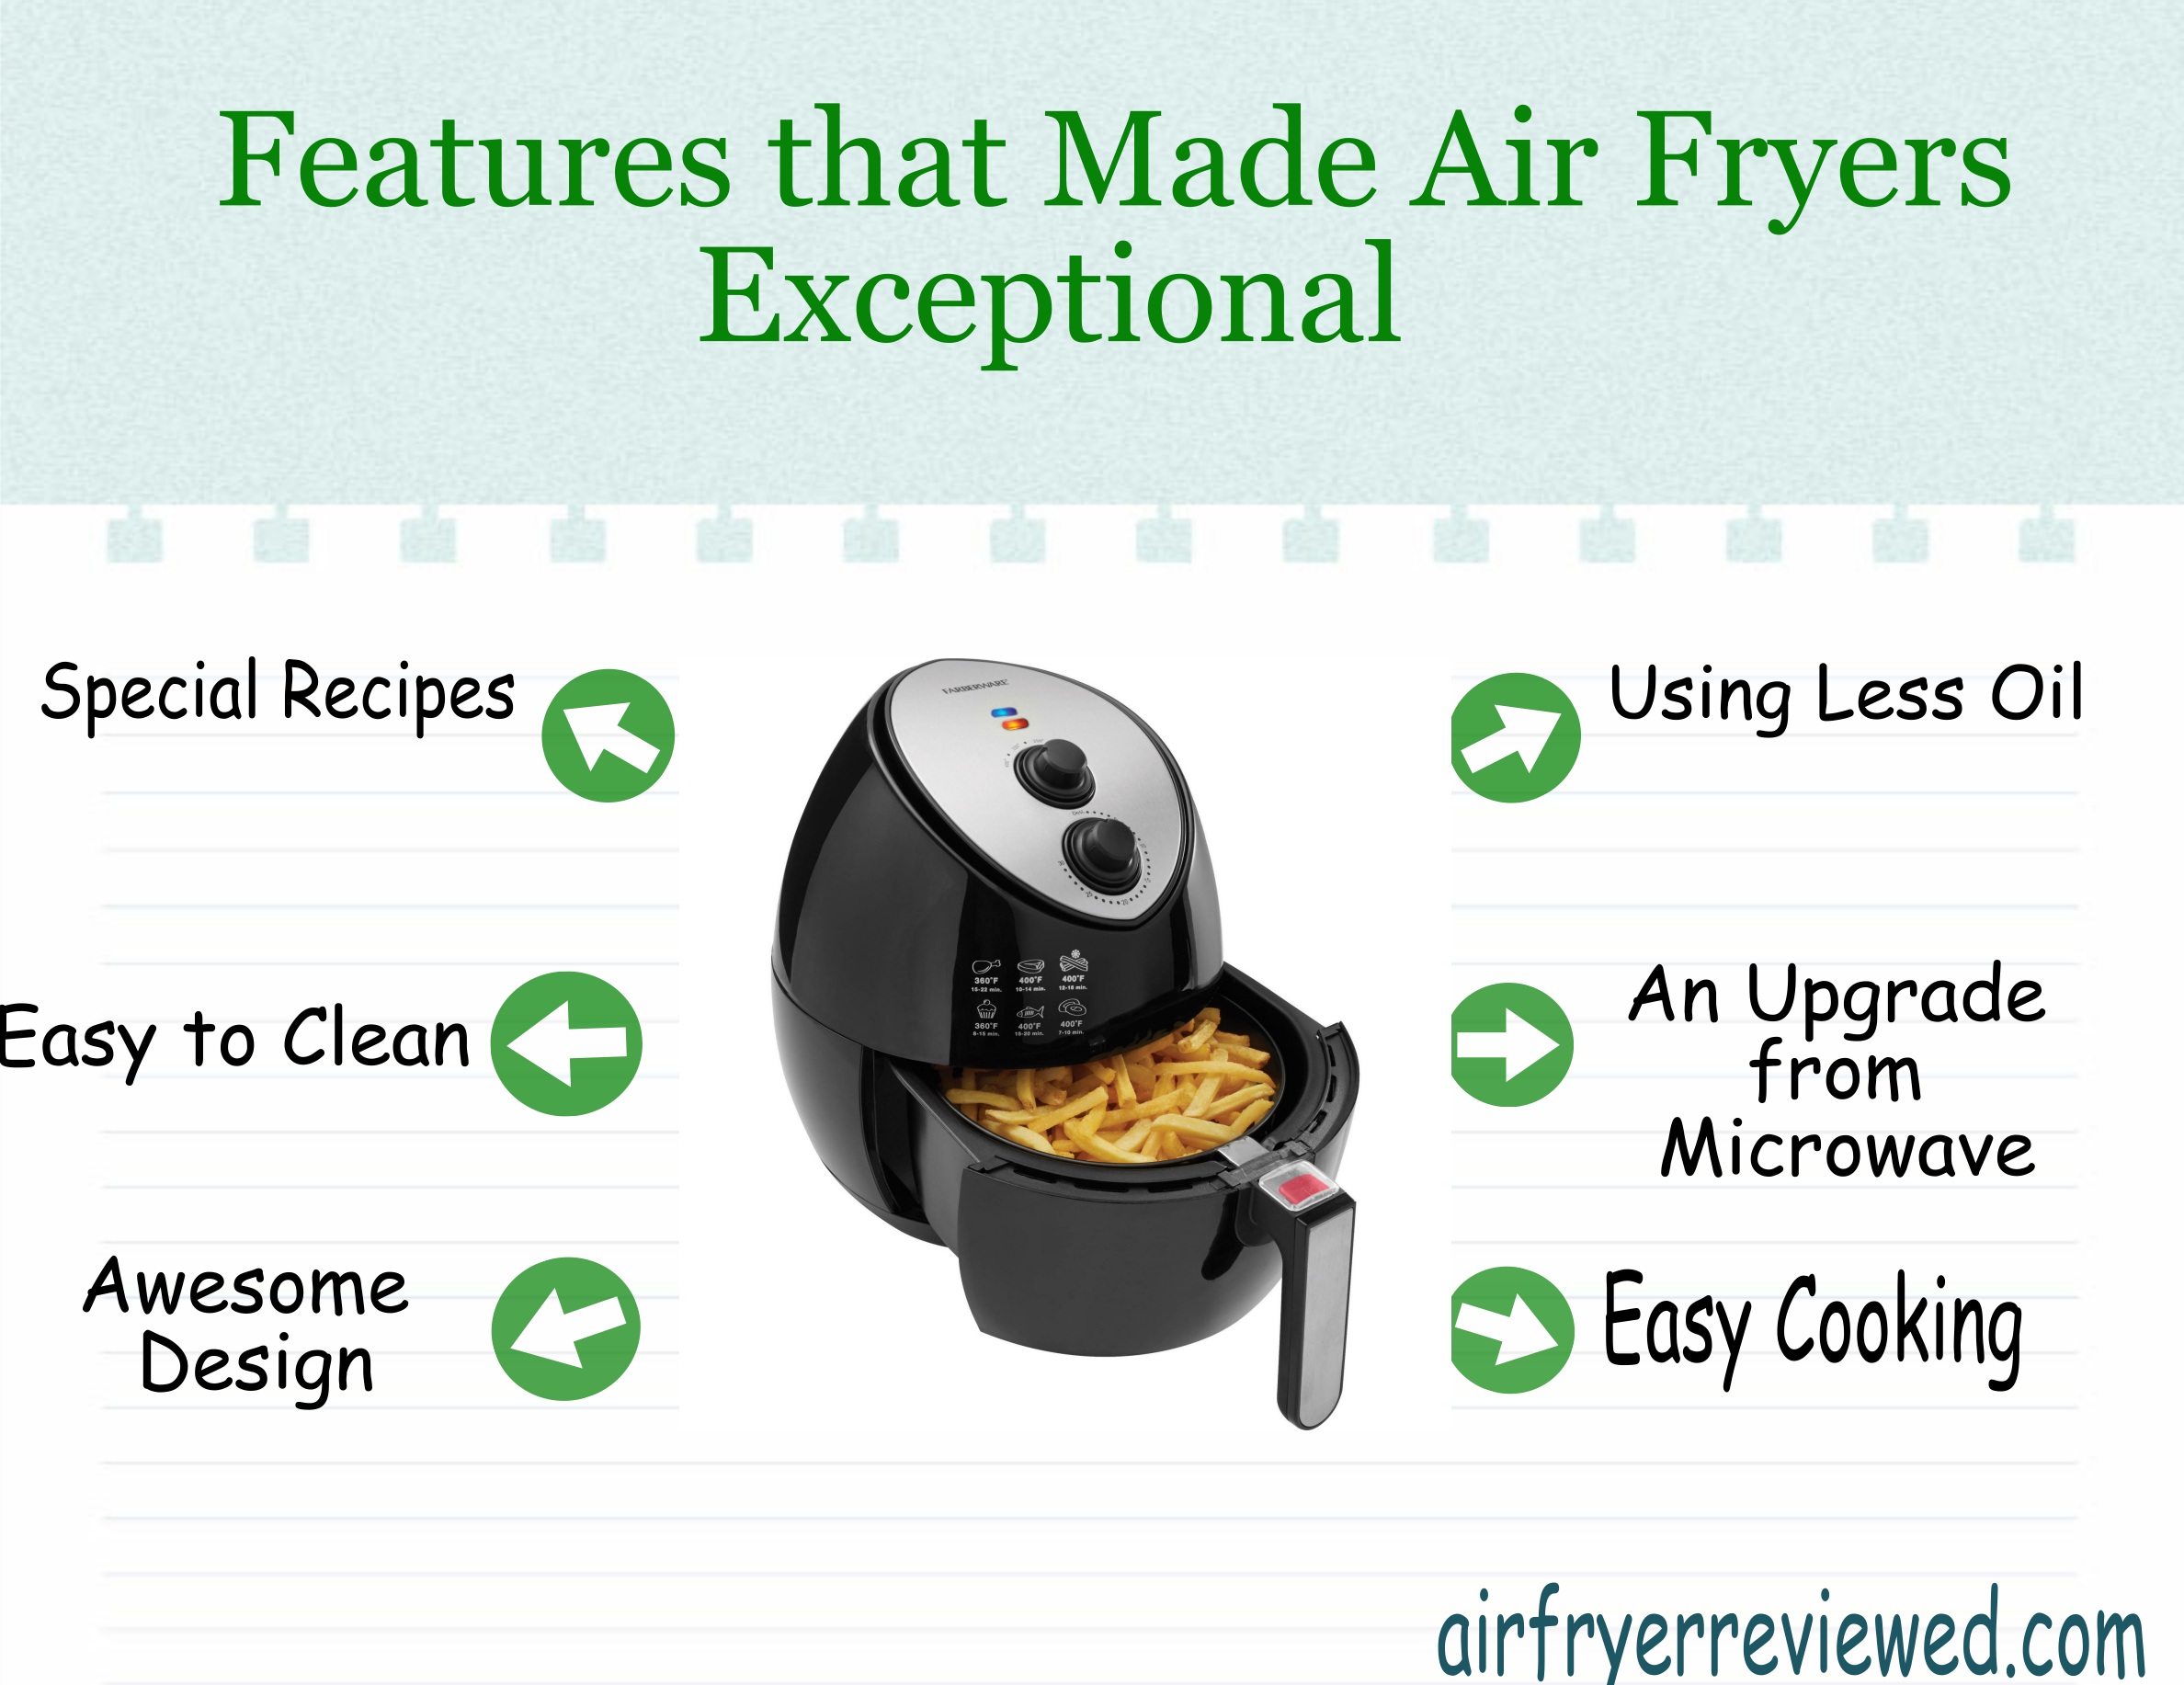 Features that Made Air Fryers Exceptional Yet Better Than Other Appliances